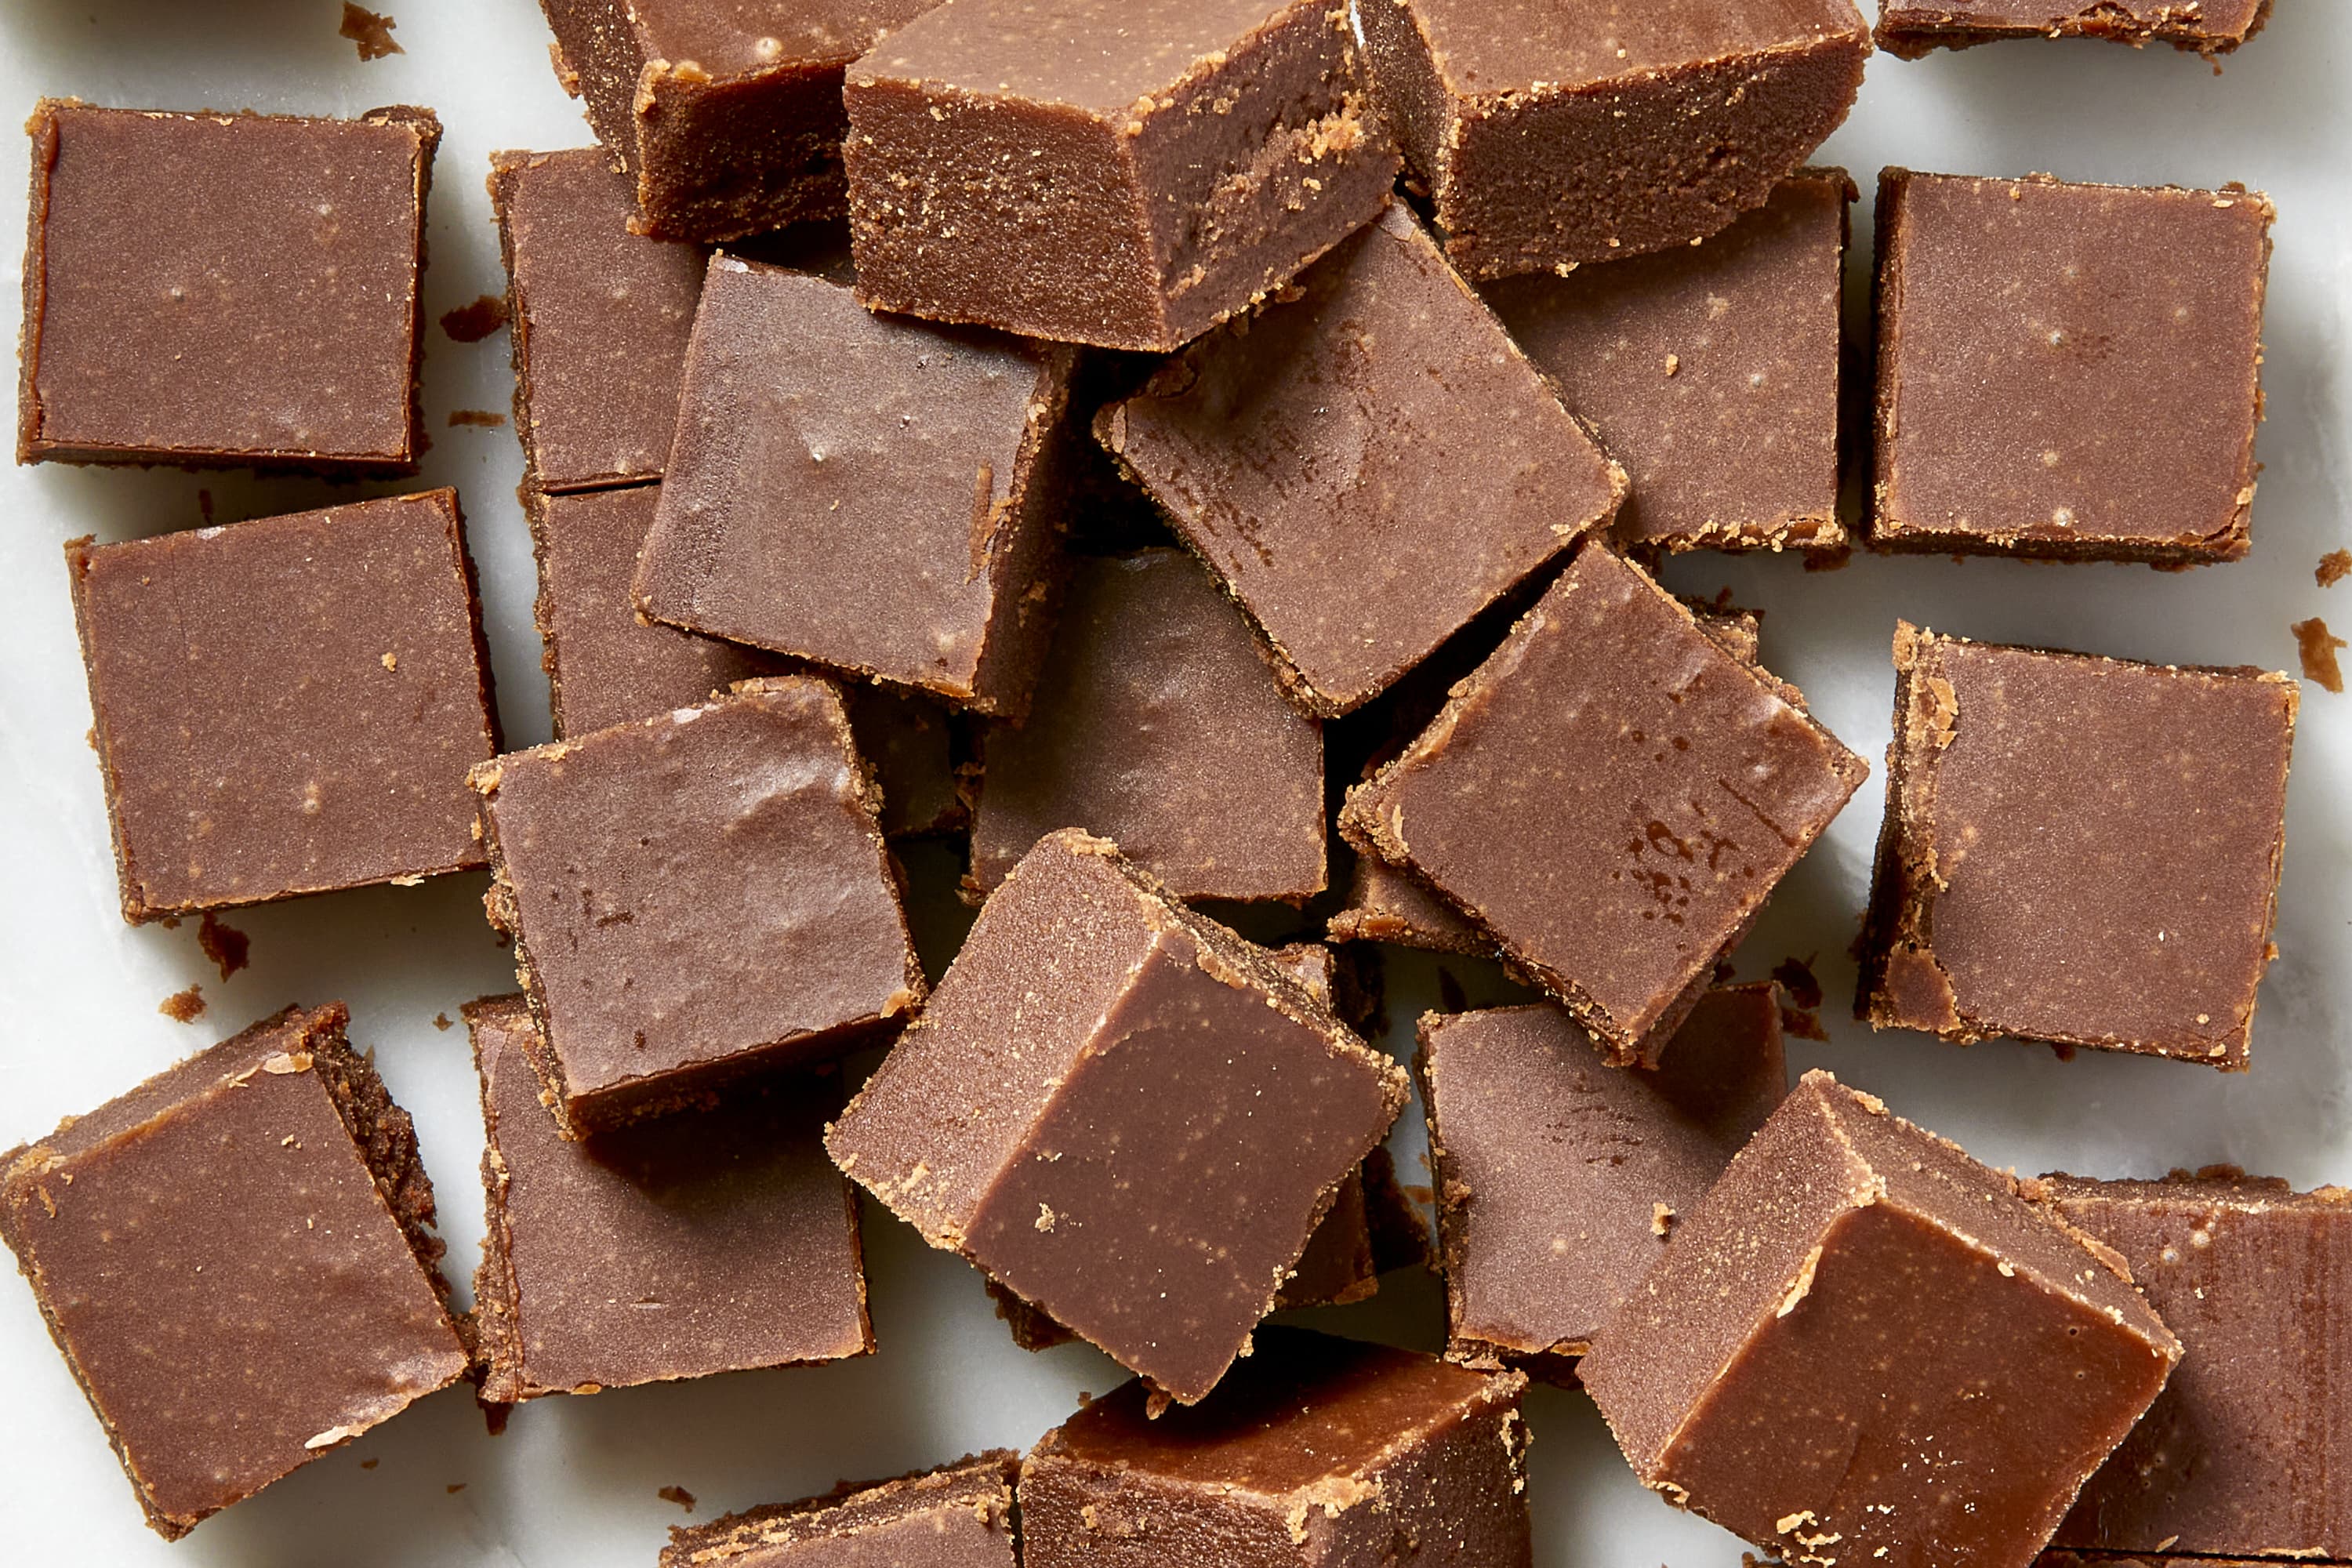 1 1/2 Pounds of Fudge, Pan of Fudge, Choose From Variety of Fudge